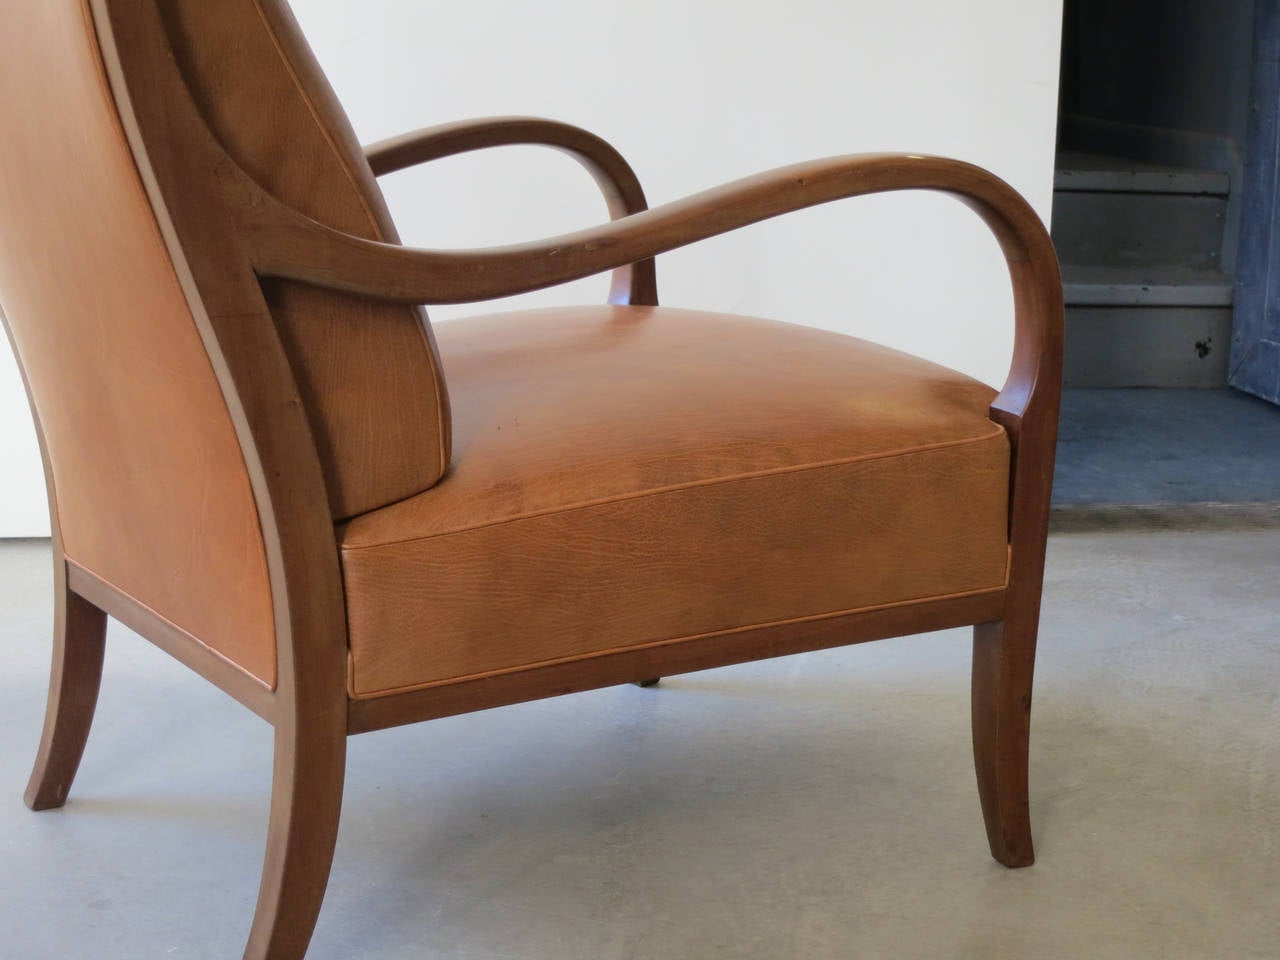 Mid-20th Century Unusual 1940s Wingback Chair by Frits Henningsen